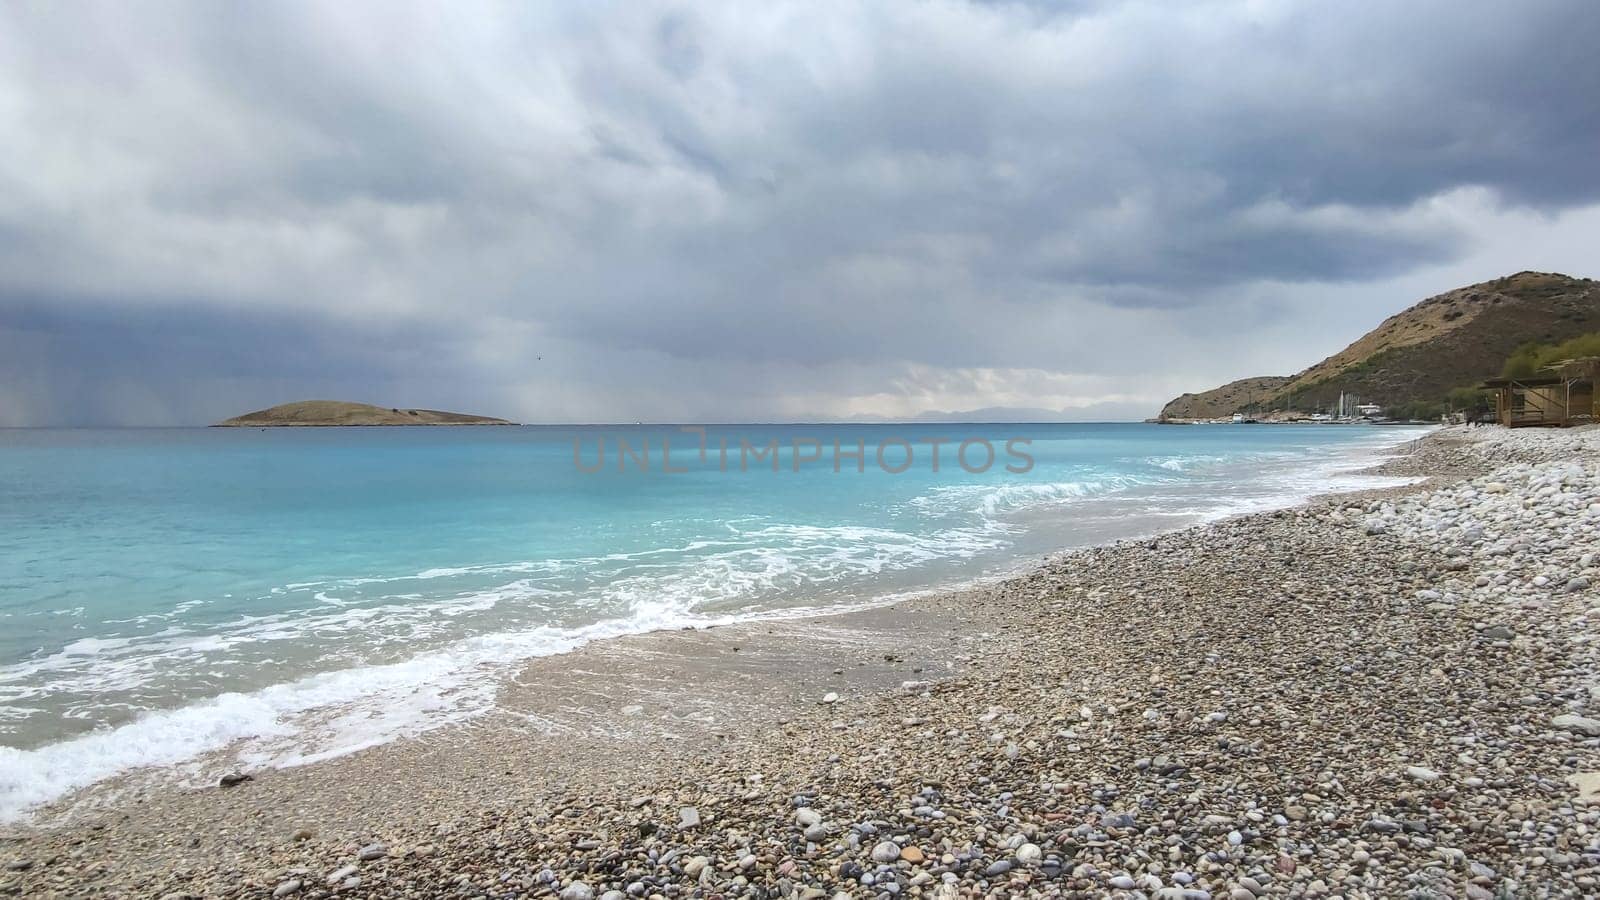 Panorama of sea coast, stormy sky over turquoise sea, view from shore.